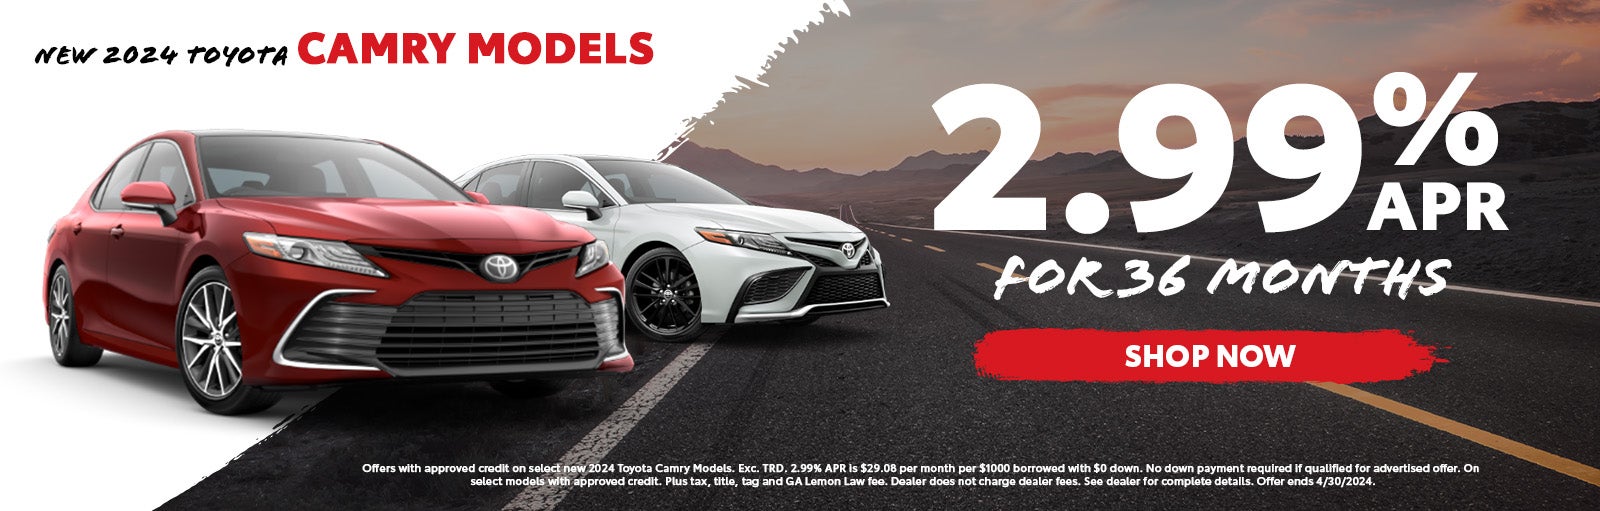 New 2024 Toyota Camry Models in Kennesaw, GA